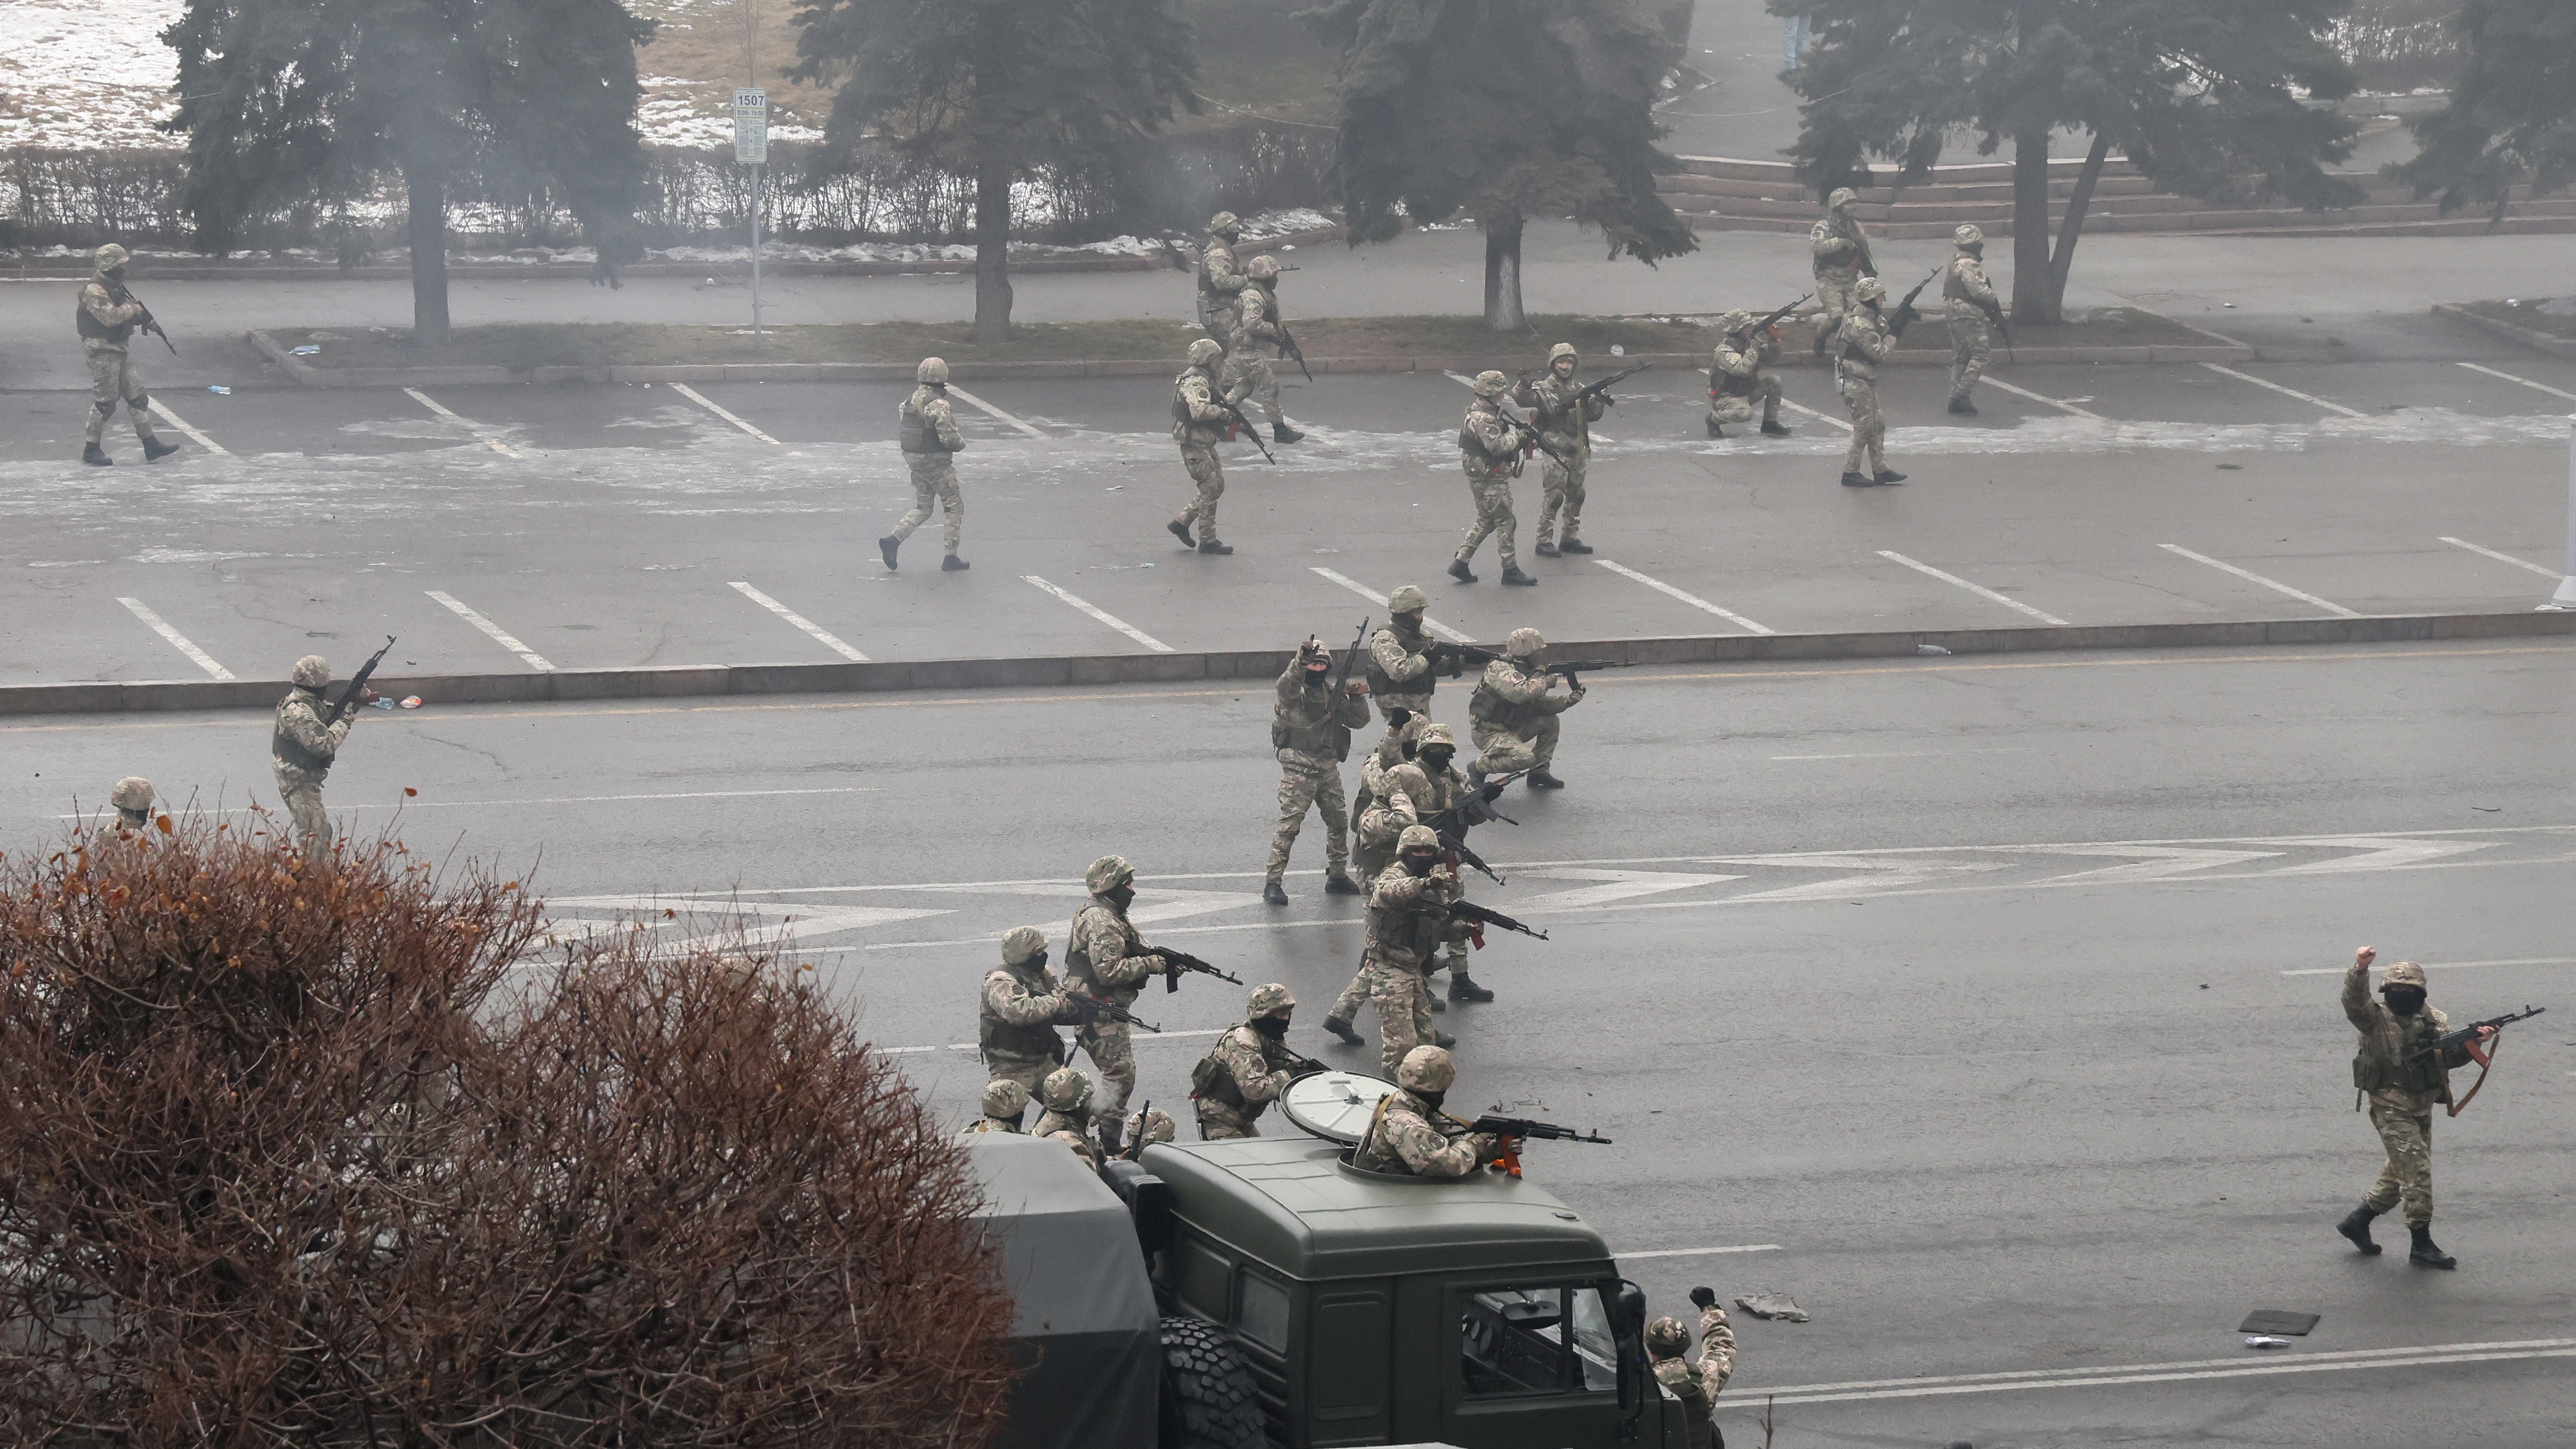 Security forces on the streets in Almaty, Kazakhstan